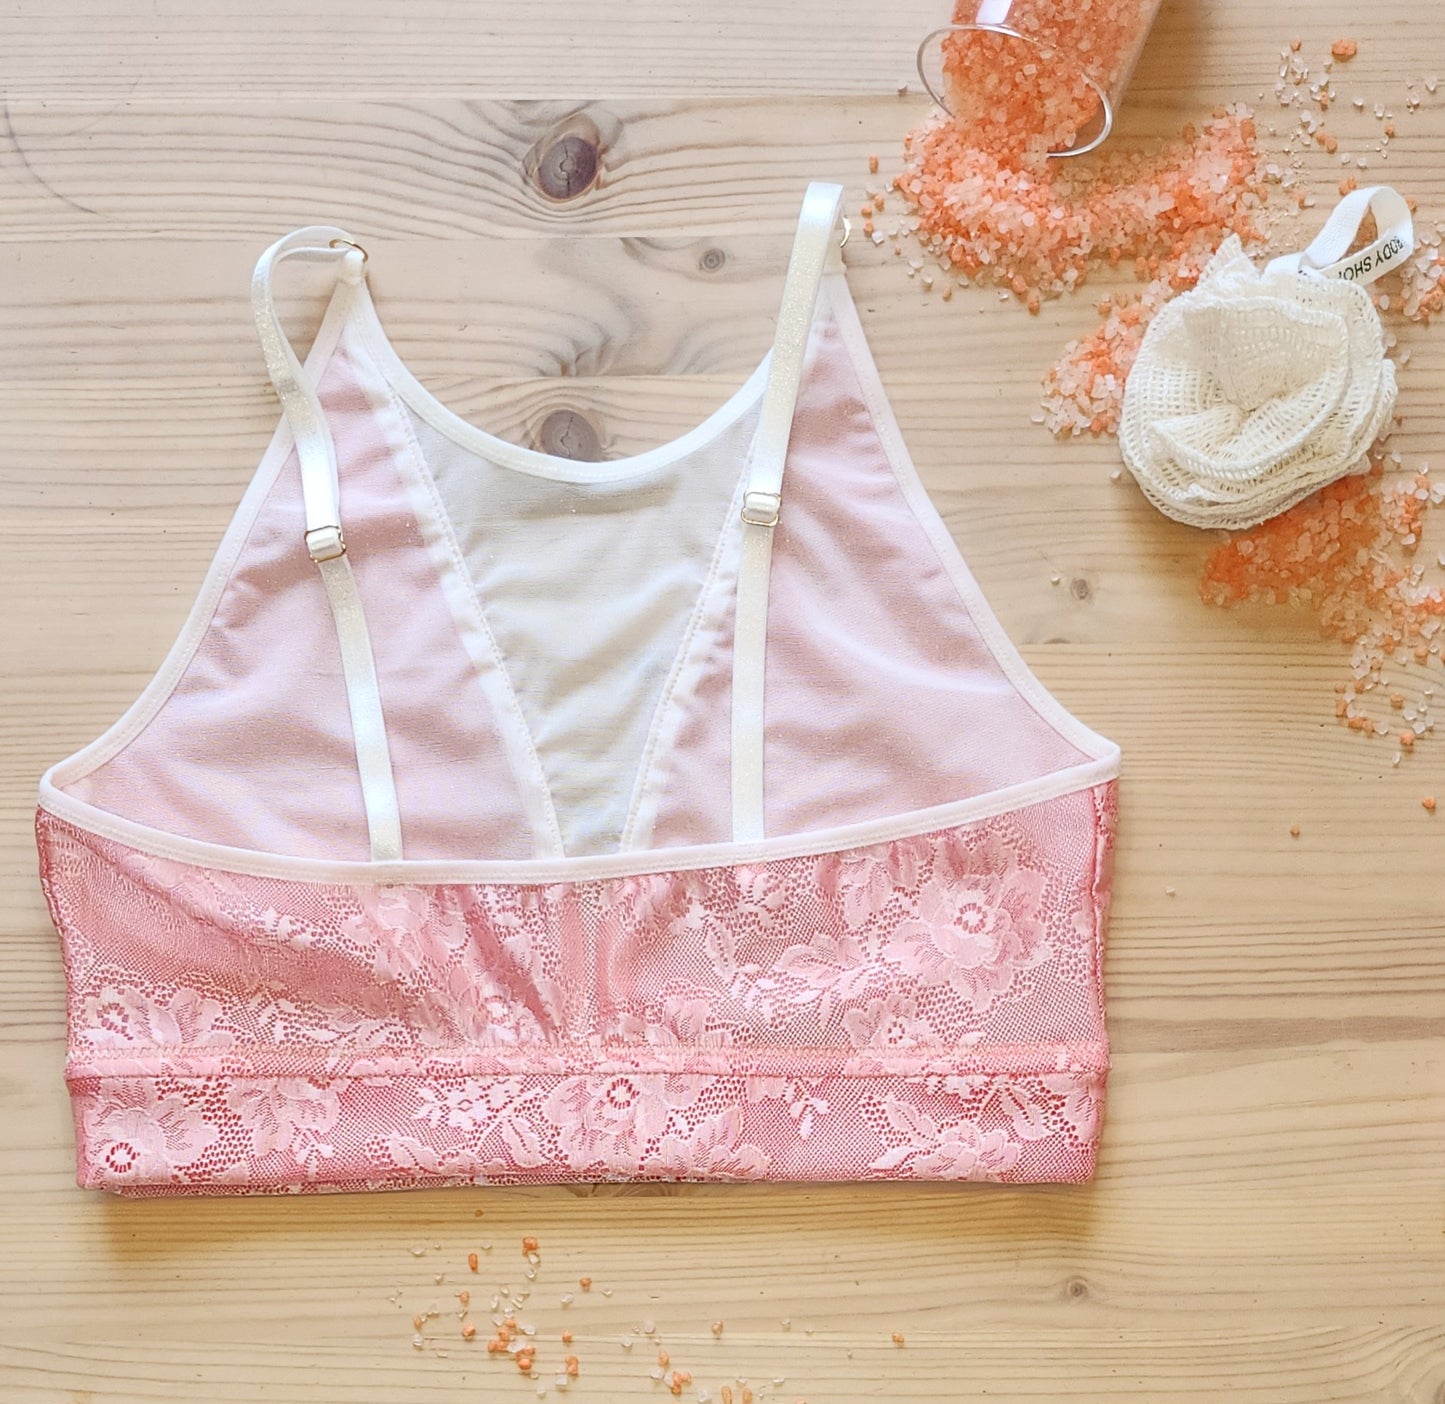 Sewing set for HolterBra Zoe with stretch mesh in coral. Pattern included free of charge. IDdiyklx5